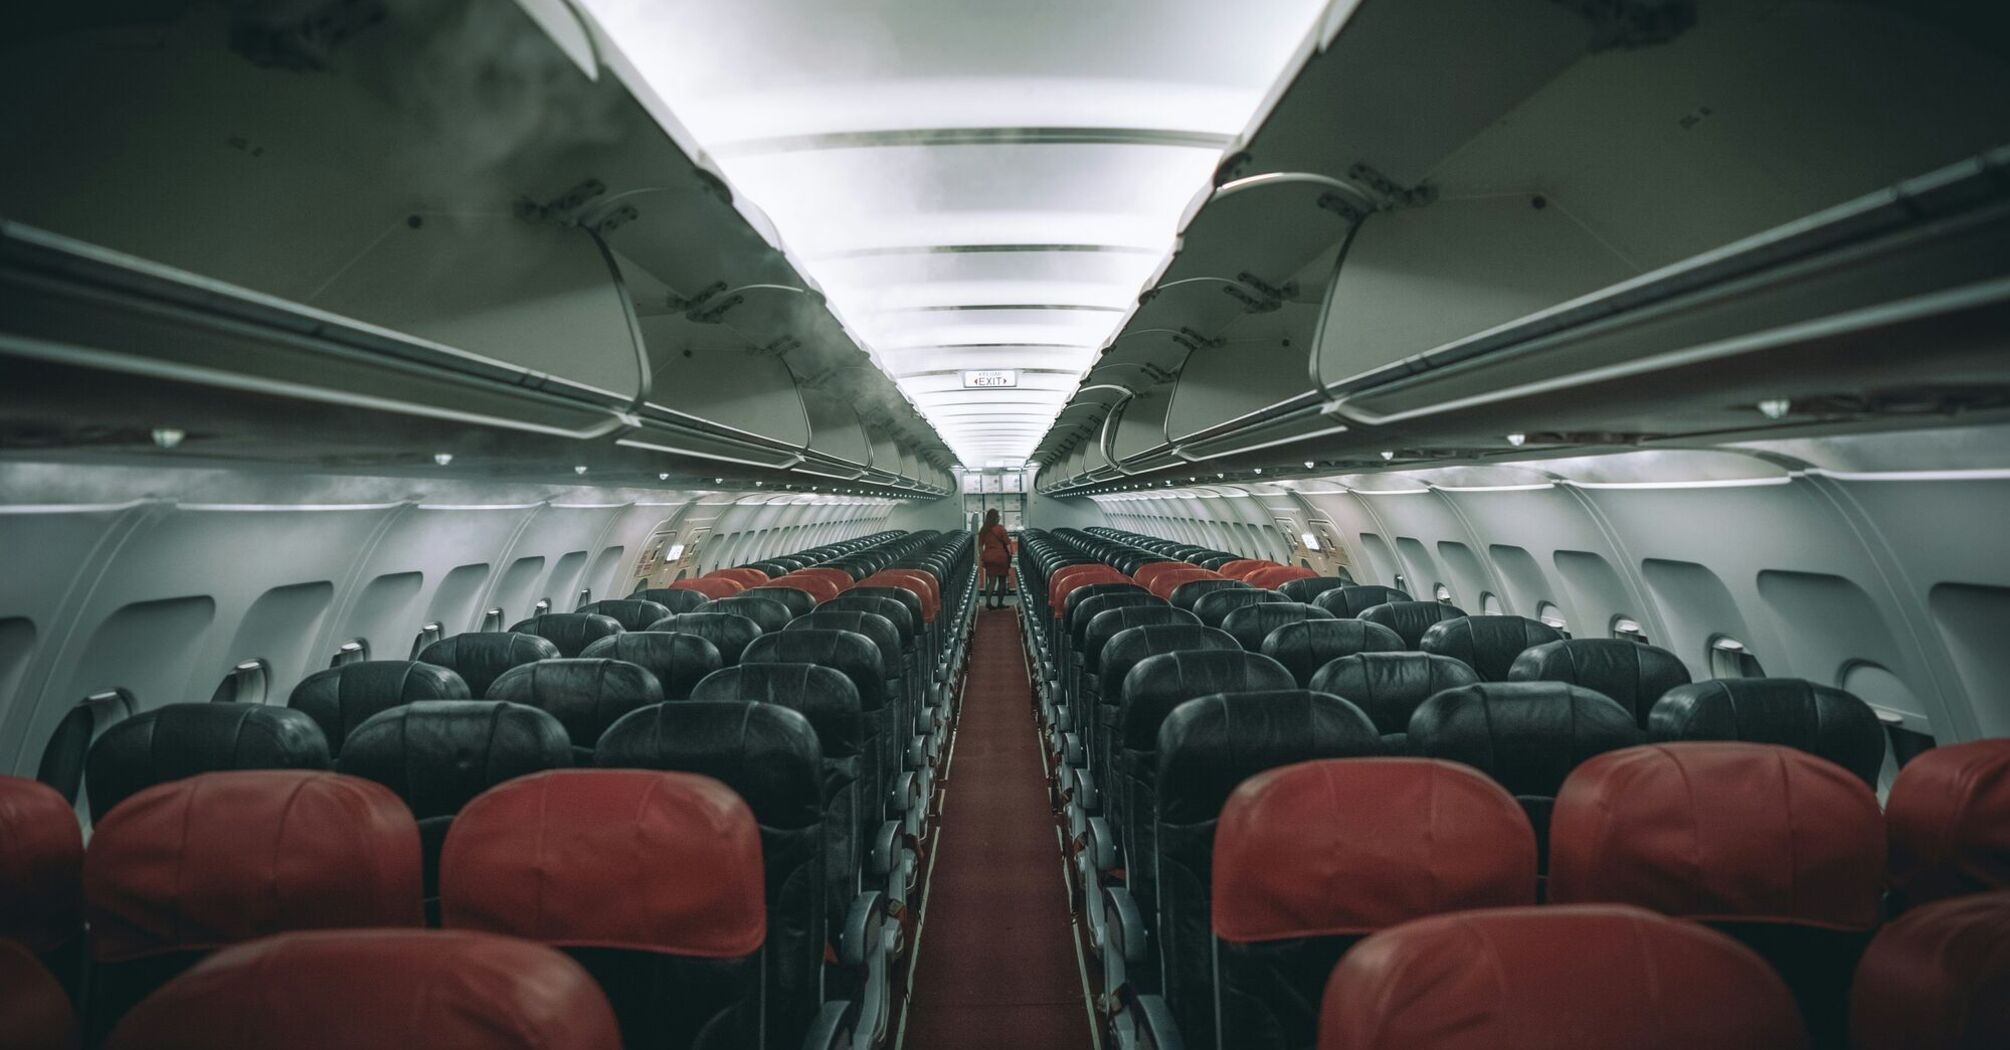 Rows of empty seats inside the airplane